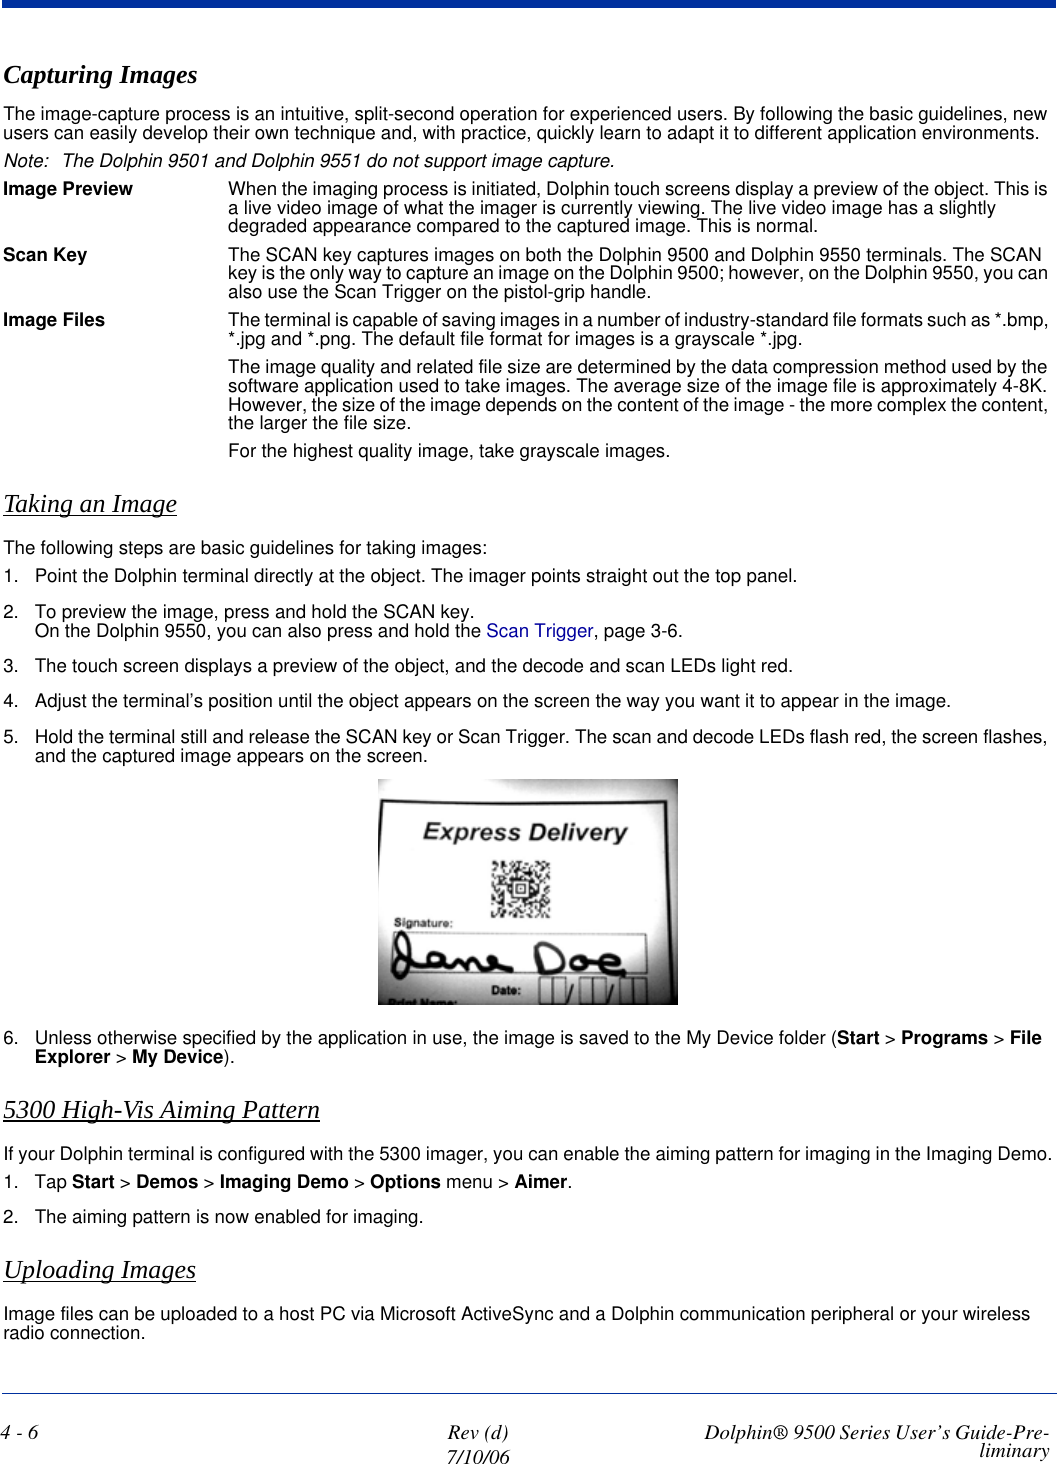 4 - 6 Rev (d)7/10/06 Dolphin® 9500 Series User’s Guide-Pre-liminaryCapturing ImagesThe image-capture process is an intuitive, split-second operation for experienced users. By following the basic guidelines, new users can easily develop their own technique and, with practice, quickly learn to adapt it to different application environments. Note: The Dolphin 9501 and Dolphin 9551 do not support image capture.Image Preview When the imaging process is initiated, Dolphin touch screens display a preview of the object. This is a live video image of what the imager is currently viewing. The live video image has a slightly degraded appearance compared to the captured image. This is normal.Scan Key The SCAN key captures images on both the Dolphin 9500 and Dolphin 9550 terminals. The SCAN key is the only way to capture an image on the Dolphin 9500; however, on the Dolphin 9550, you can also use the Scan Trigger on the pistol-grip handle. Image Files The terminal is capable of saving images in a number of industry-standard file formats such as *.bmp, *.jpg and *.png. The default file format for images is a grayscale *.jpg. The image quality and related file size are determined by the data compression method used by the software application used to take images. The average size of the image file is approximately 4-8K. However, the size of the image depends on the content of the image - the more complex the content, the larger the file size. For the highest quality image, take grayscale images.Taking an ImageThe following steps are basic guidelines for taking images:1. Point the Dolphin terminal directly at the object. The imager points straight out the top panel.2. To preview the image, press and hold the SCAN key. On the Dolphin 9550, you can also press and hold the Scan Trigger, page 3-6.3. The touch screen displays a preview of the object, and the decode and scan LEDs light red.4. Adjust the terminal’s position until the object appears on the screen the way you want it to appear in the image.5. Hold the terminal still and release the SCAN key or Scan Trigger. The scan and decode LEDs flash red, the screen flashes, and the captured image appears on the screen. 6. Unless otherwise specified by the application in use, the image is saved to the My Device folder (Start &gt; Programs &gt; File Explorer &gt; My Device). 5300 High-Vis Aiming PatternIf your Dolphin terminal is configured with the 5300 imager, you can enable the aiming pattern for imaging in the Imaging Demo.1. Tap Start &gt; Demos &gt; Imaging Demo &gt; Options menu &gt; Aimer.2. The aiming pattern is now enabled for imaging.Uploading ImagesImage files can be uploaded to a host PC via Microsoft ActiveSync and a Dolphin communication peripheral or your wireless radio connection.